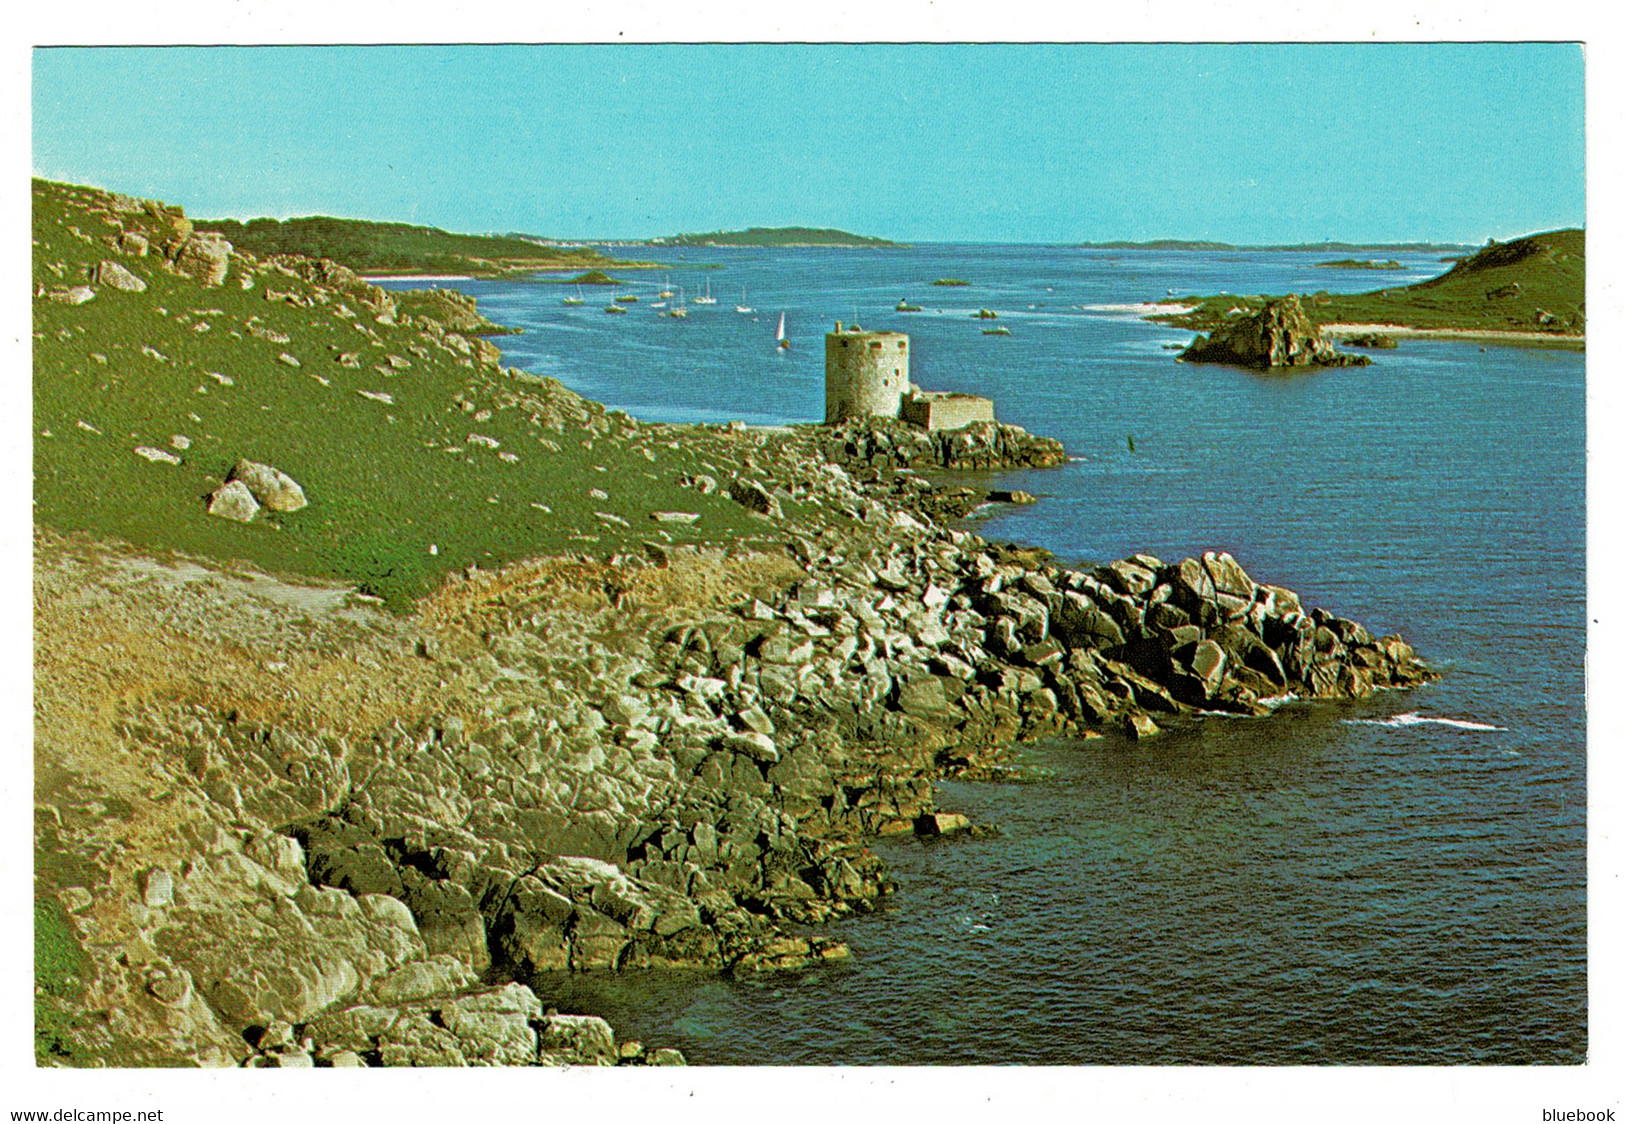 Ref 1462 - Postcard - Cromwell's Castle - Tresco - Isles Of Scilly - Scilly Isles